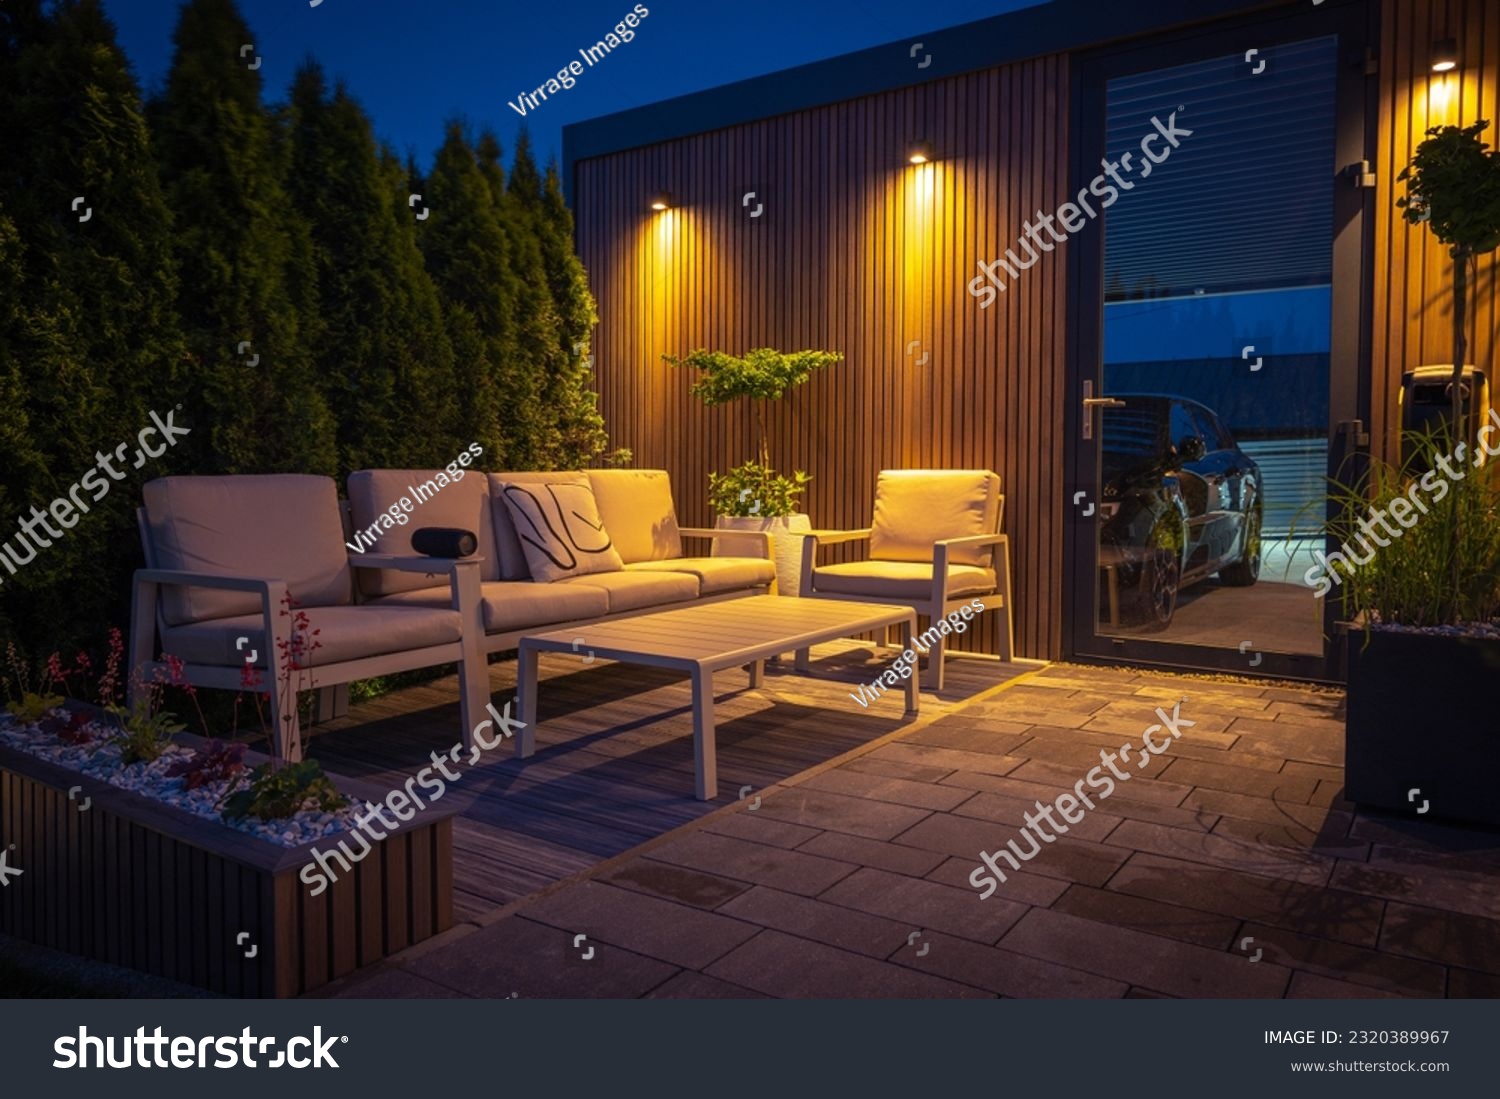 Lounge and Dining Area at Modern Residential Backyard Decorated with Outdoor Lights, Plants, Garden Table and Chairs. Cozy Summer Evening. #2320389967